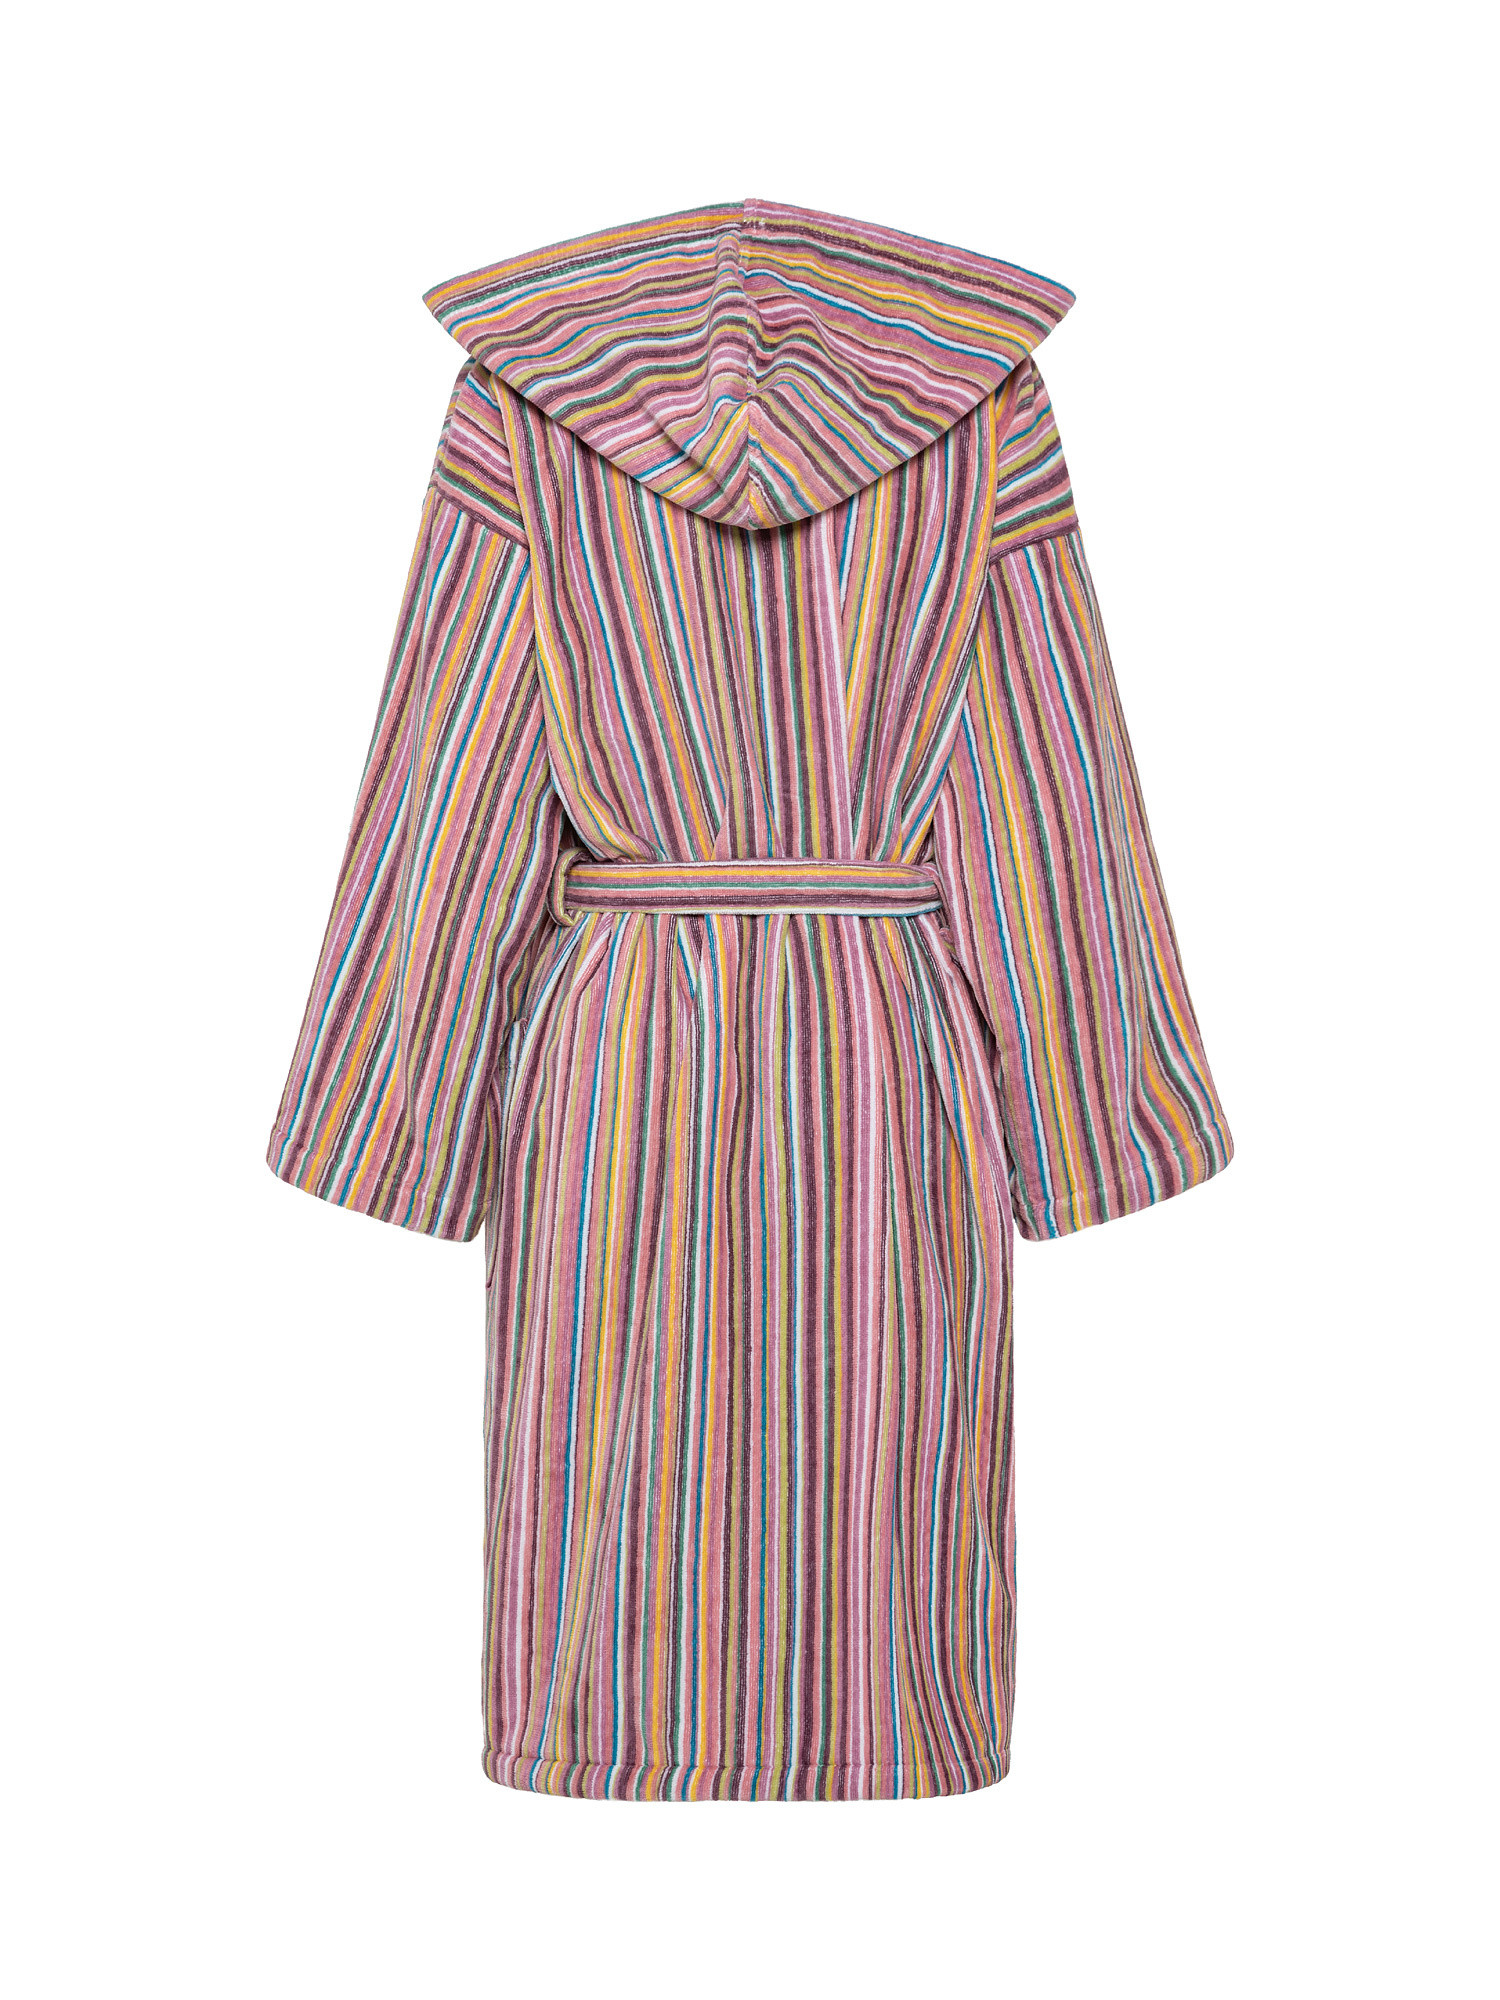 Cotton velor bathrobe with striped pattern, Multicolor, large image number 1